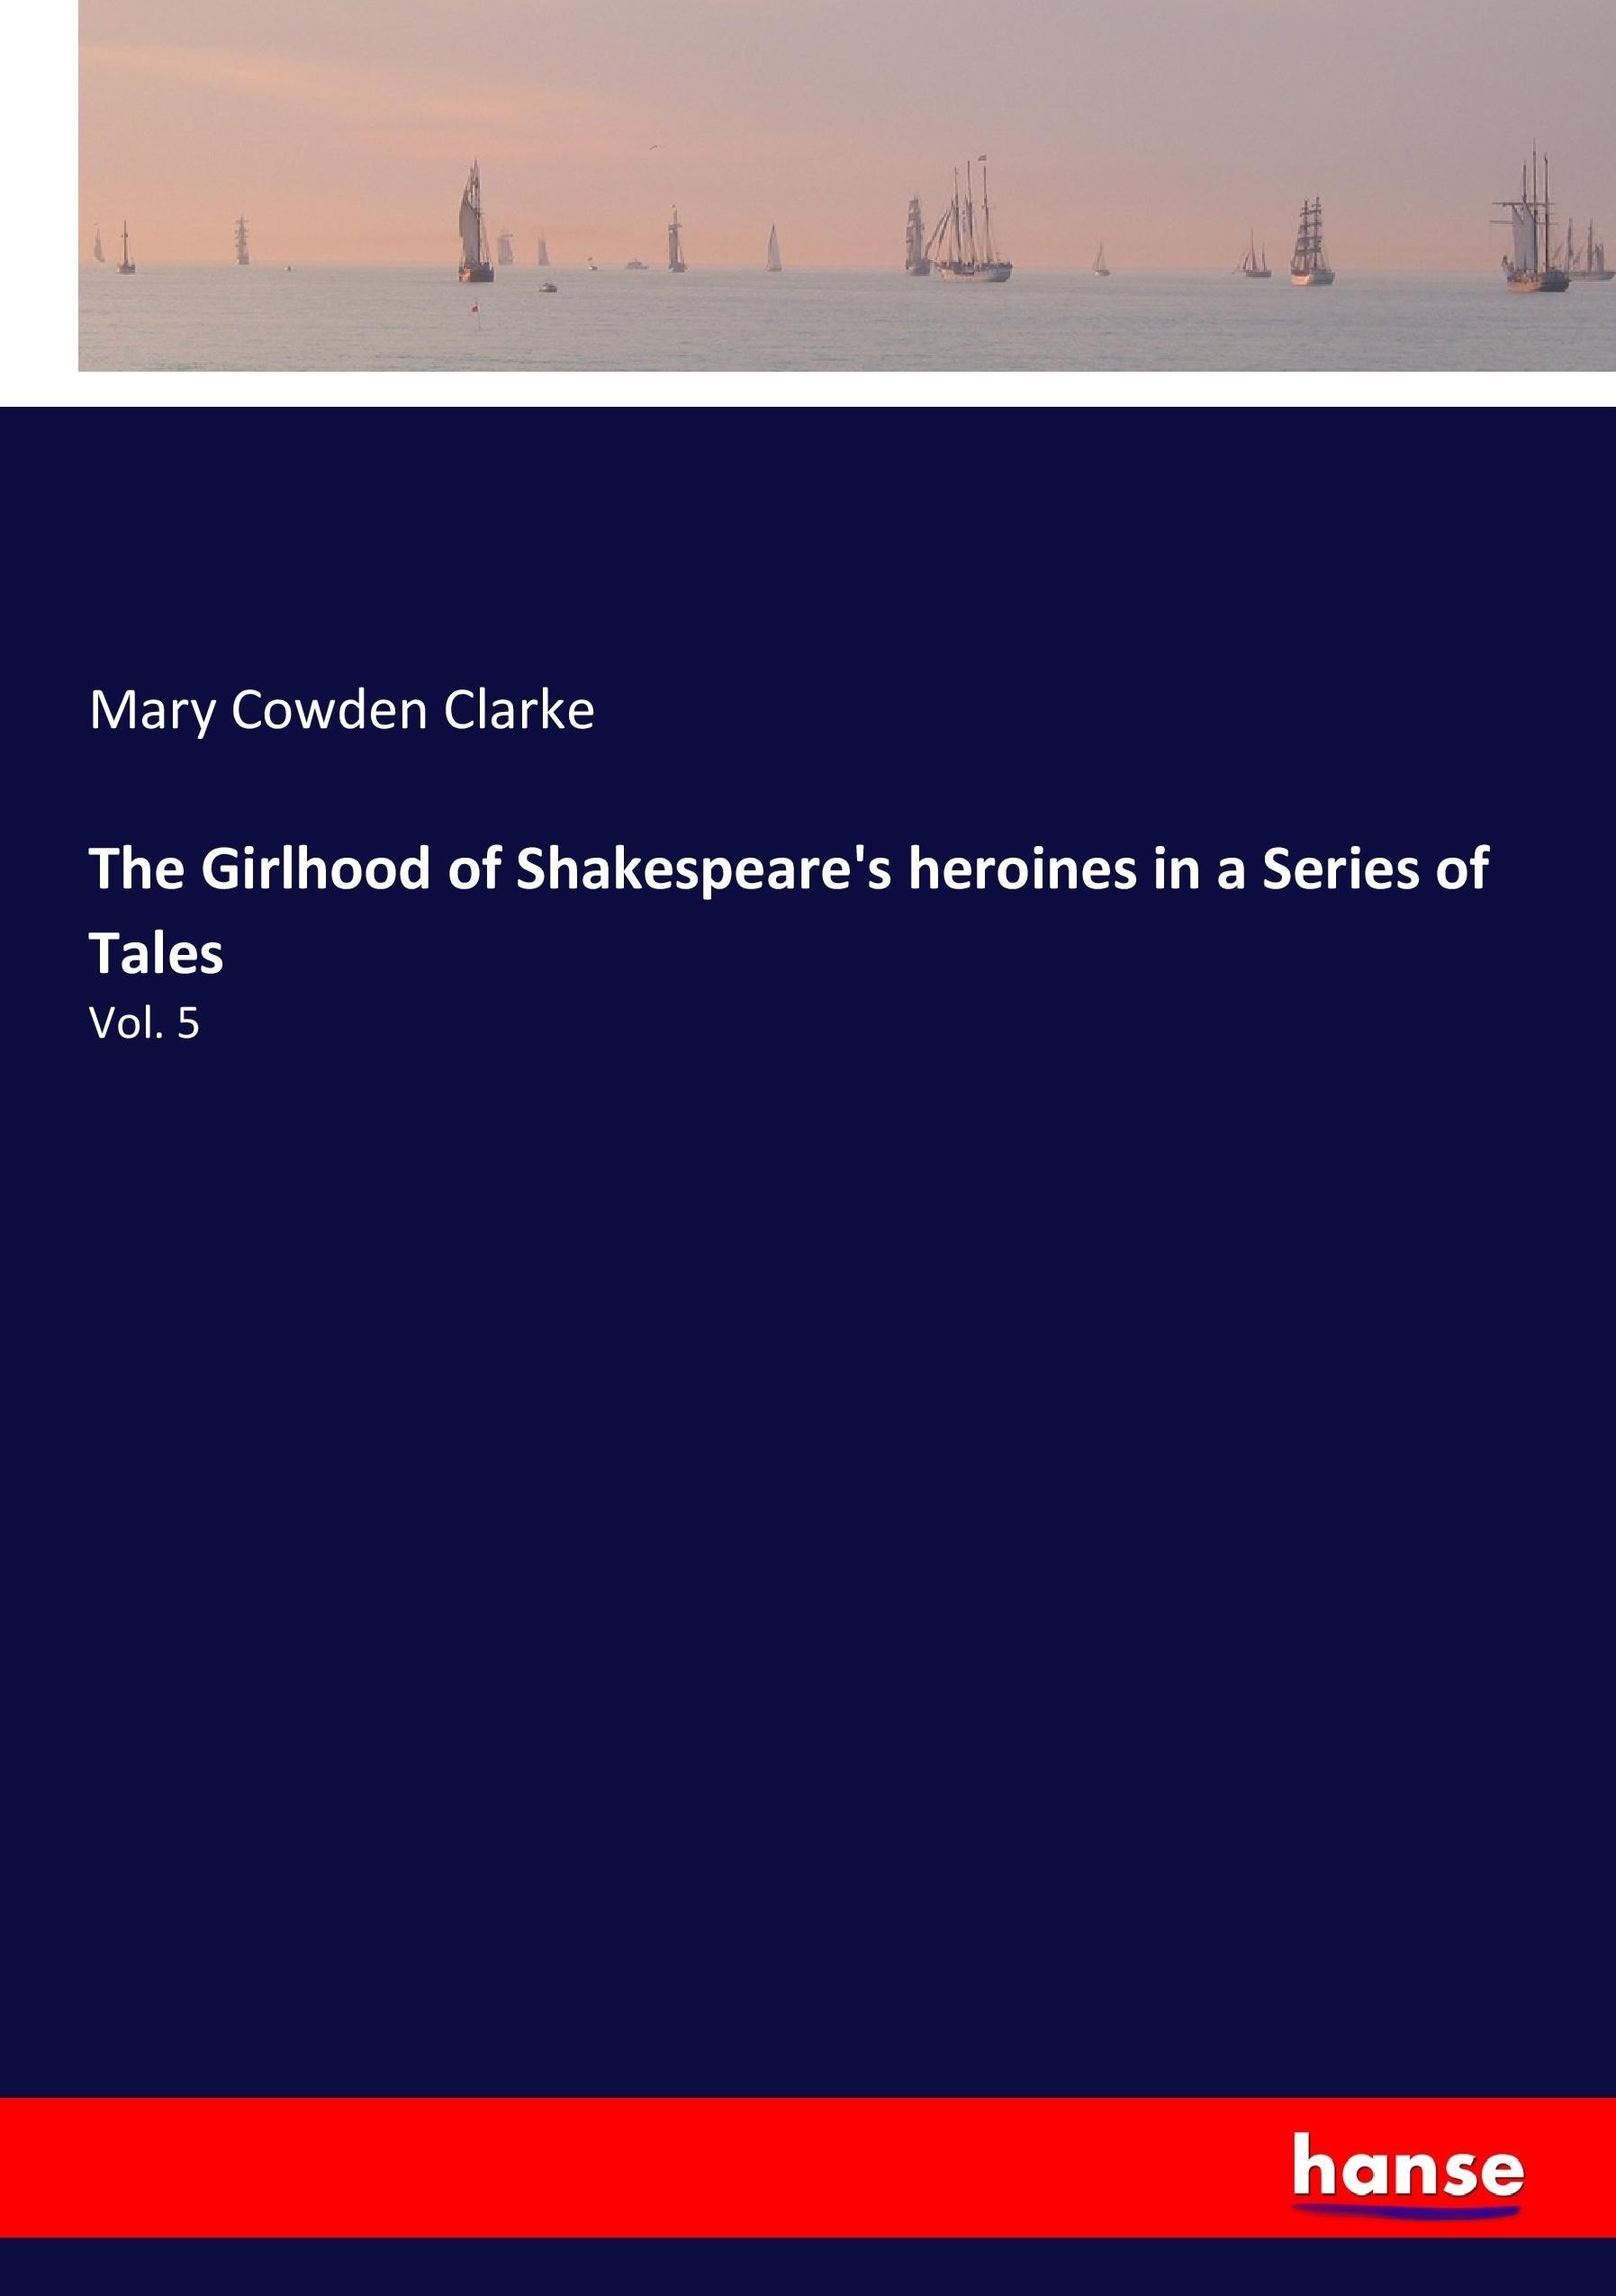 The Girlhood of Shakespeare's heroines in a Series of Tales | Vol. 5 | Mary Cowden Clarke | Taschenbuch | Paperback | 380 S. | Englisch | 2017 | hansebooks | EAN 9783337023607 - Clarke, Mary Cowden